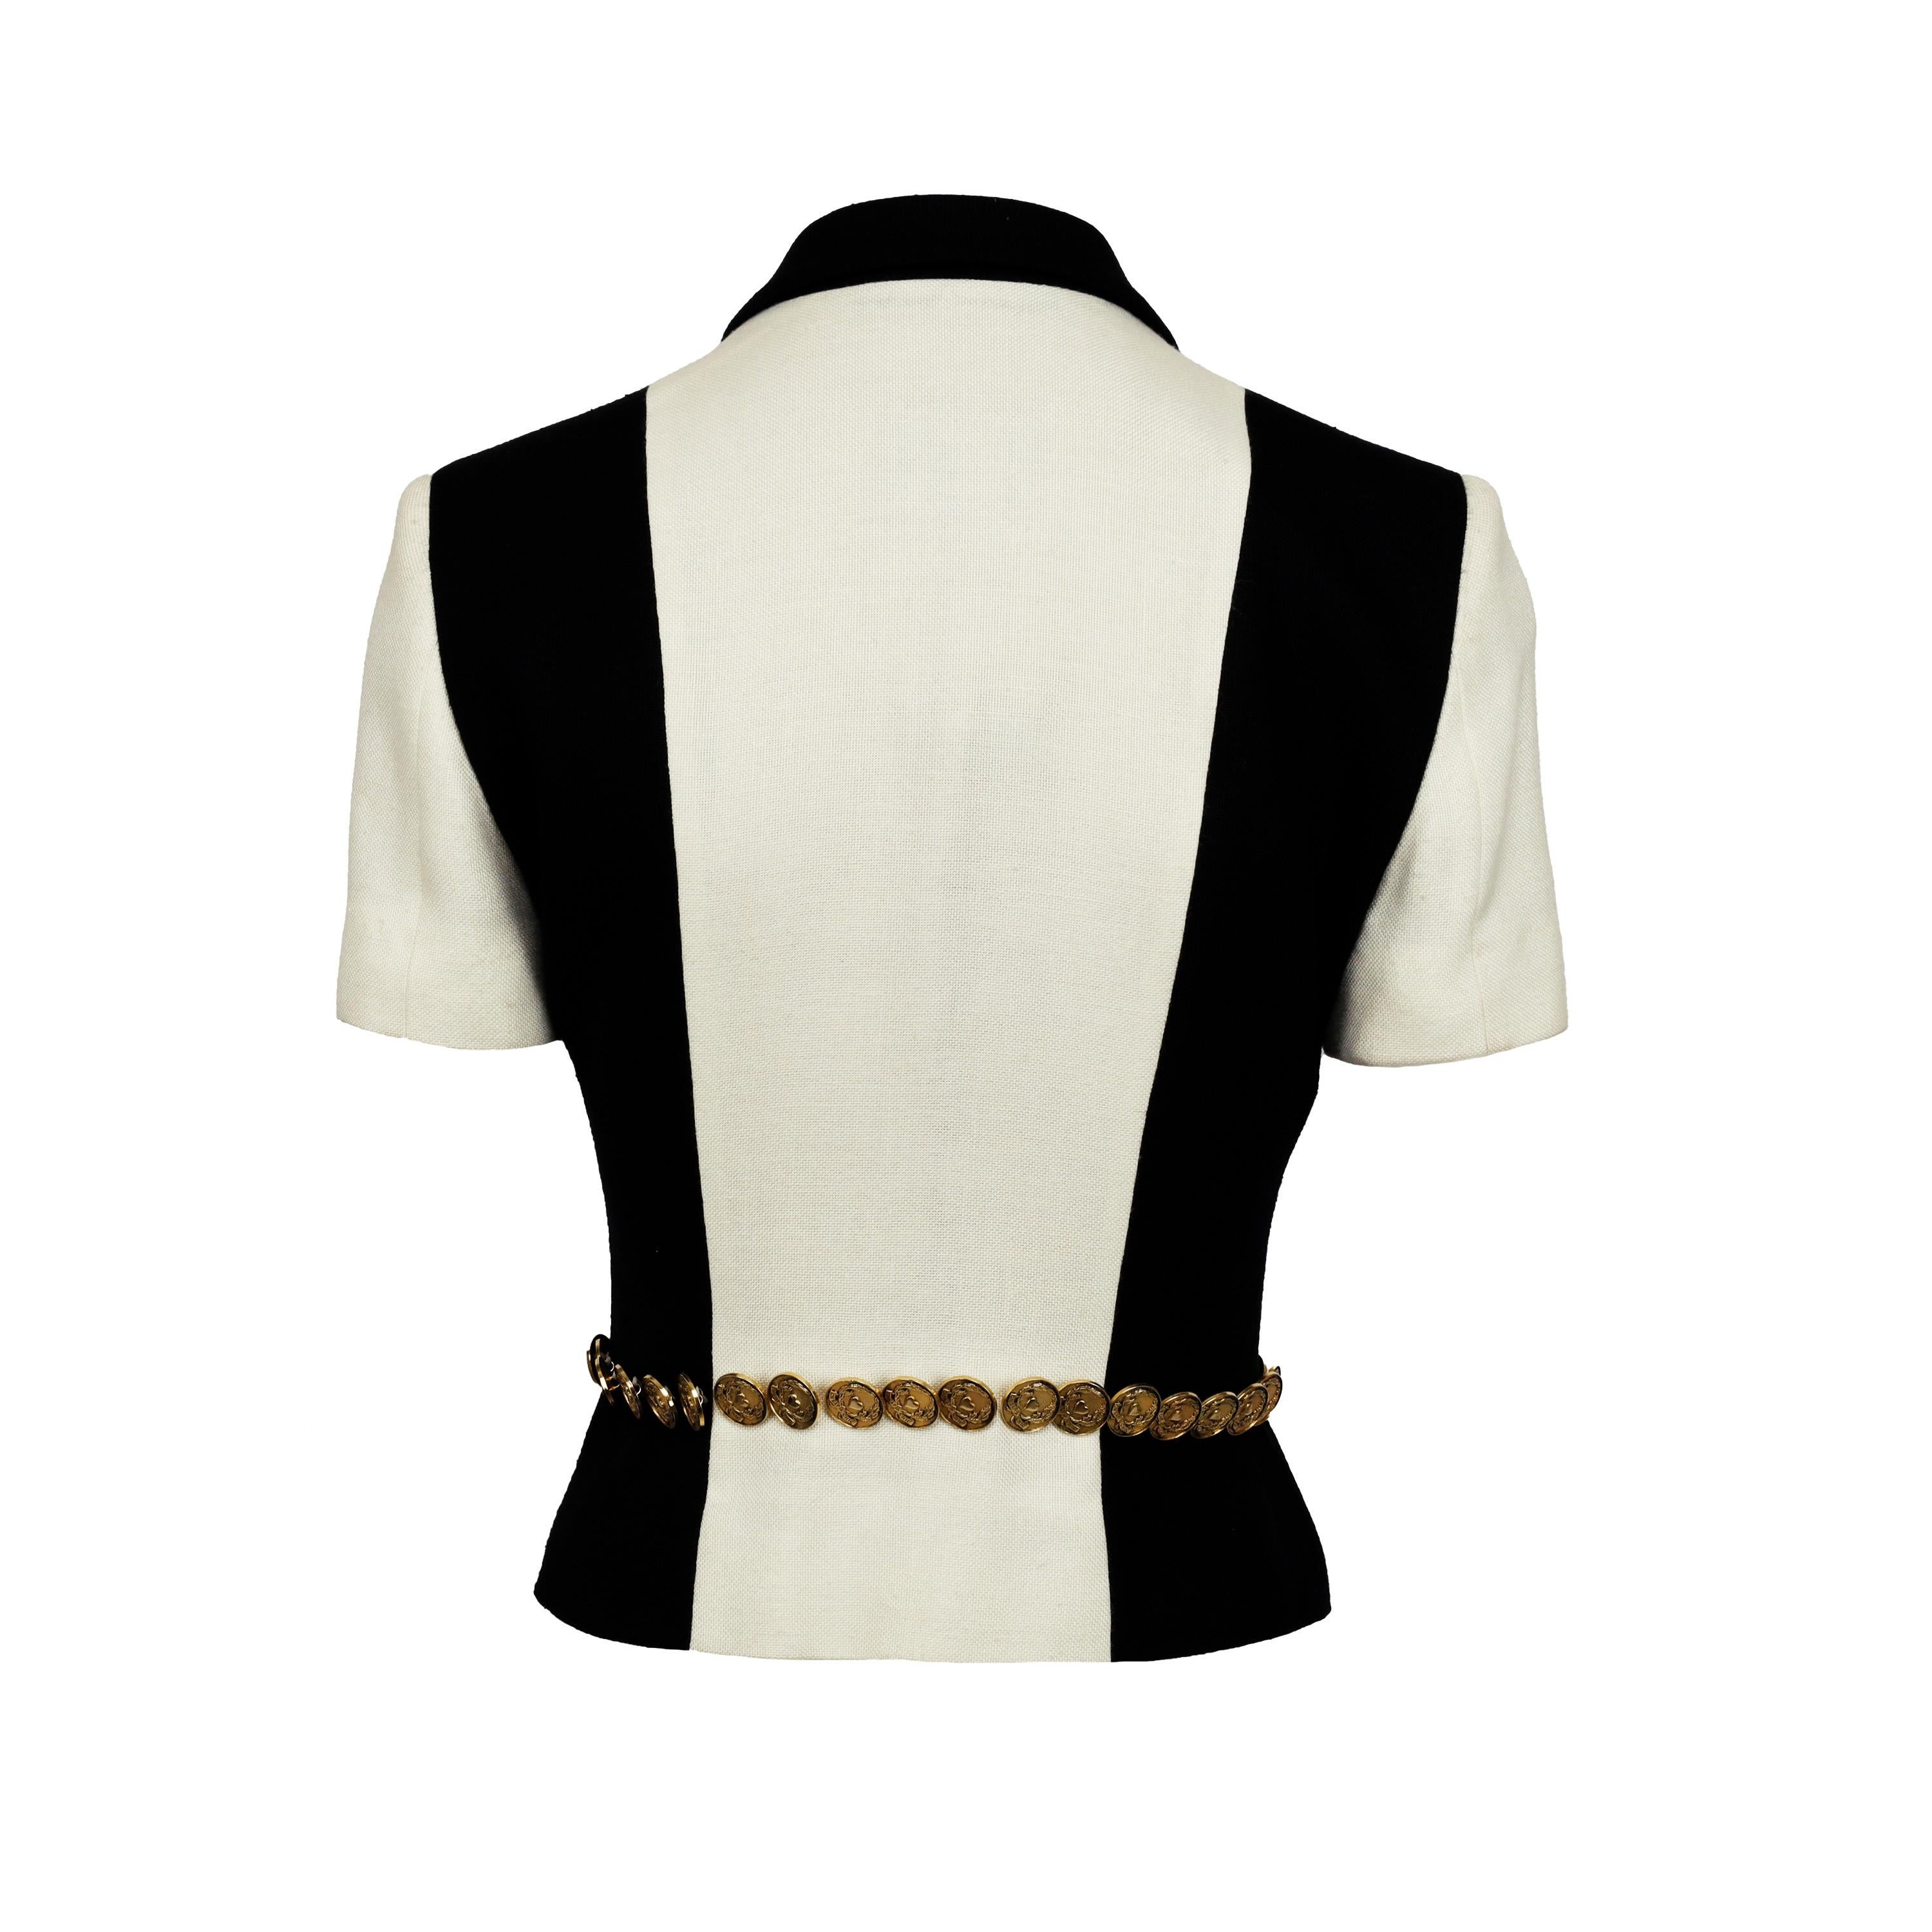 Moschino Cheap and Chic Coin Belt Jacket and Skirt Set For Sale 1